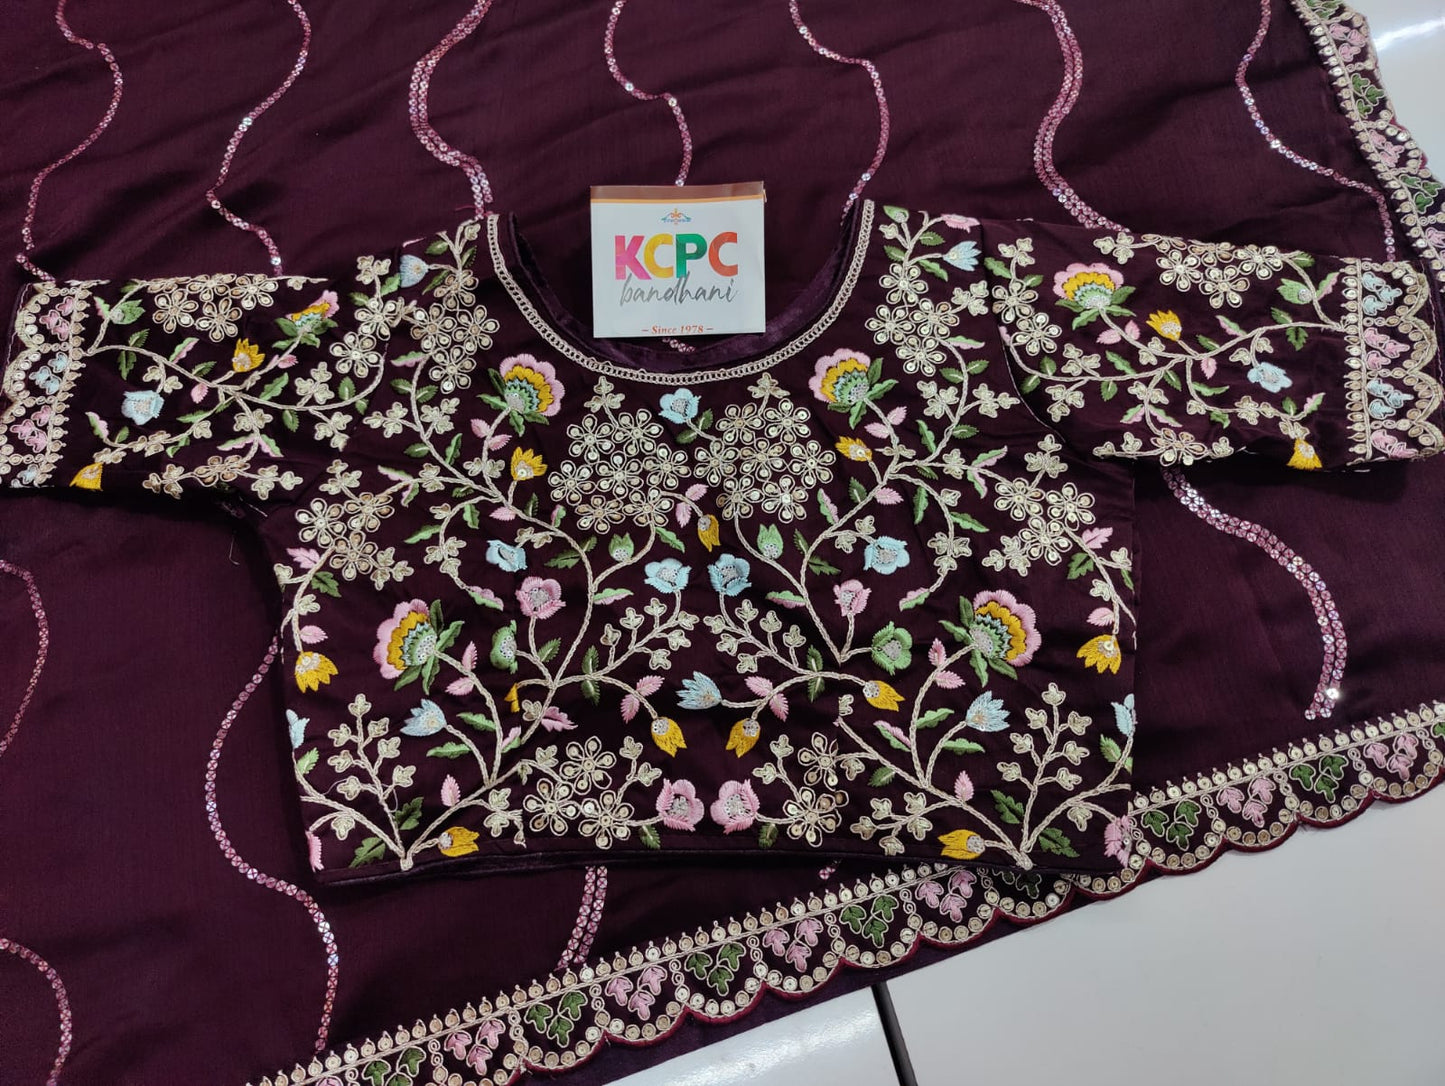 Kcpc Designer Party Wear Pure Fabric Sarees With Stitched Blouse Nr Kc Saree